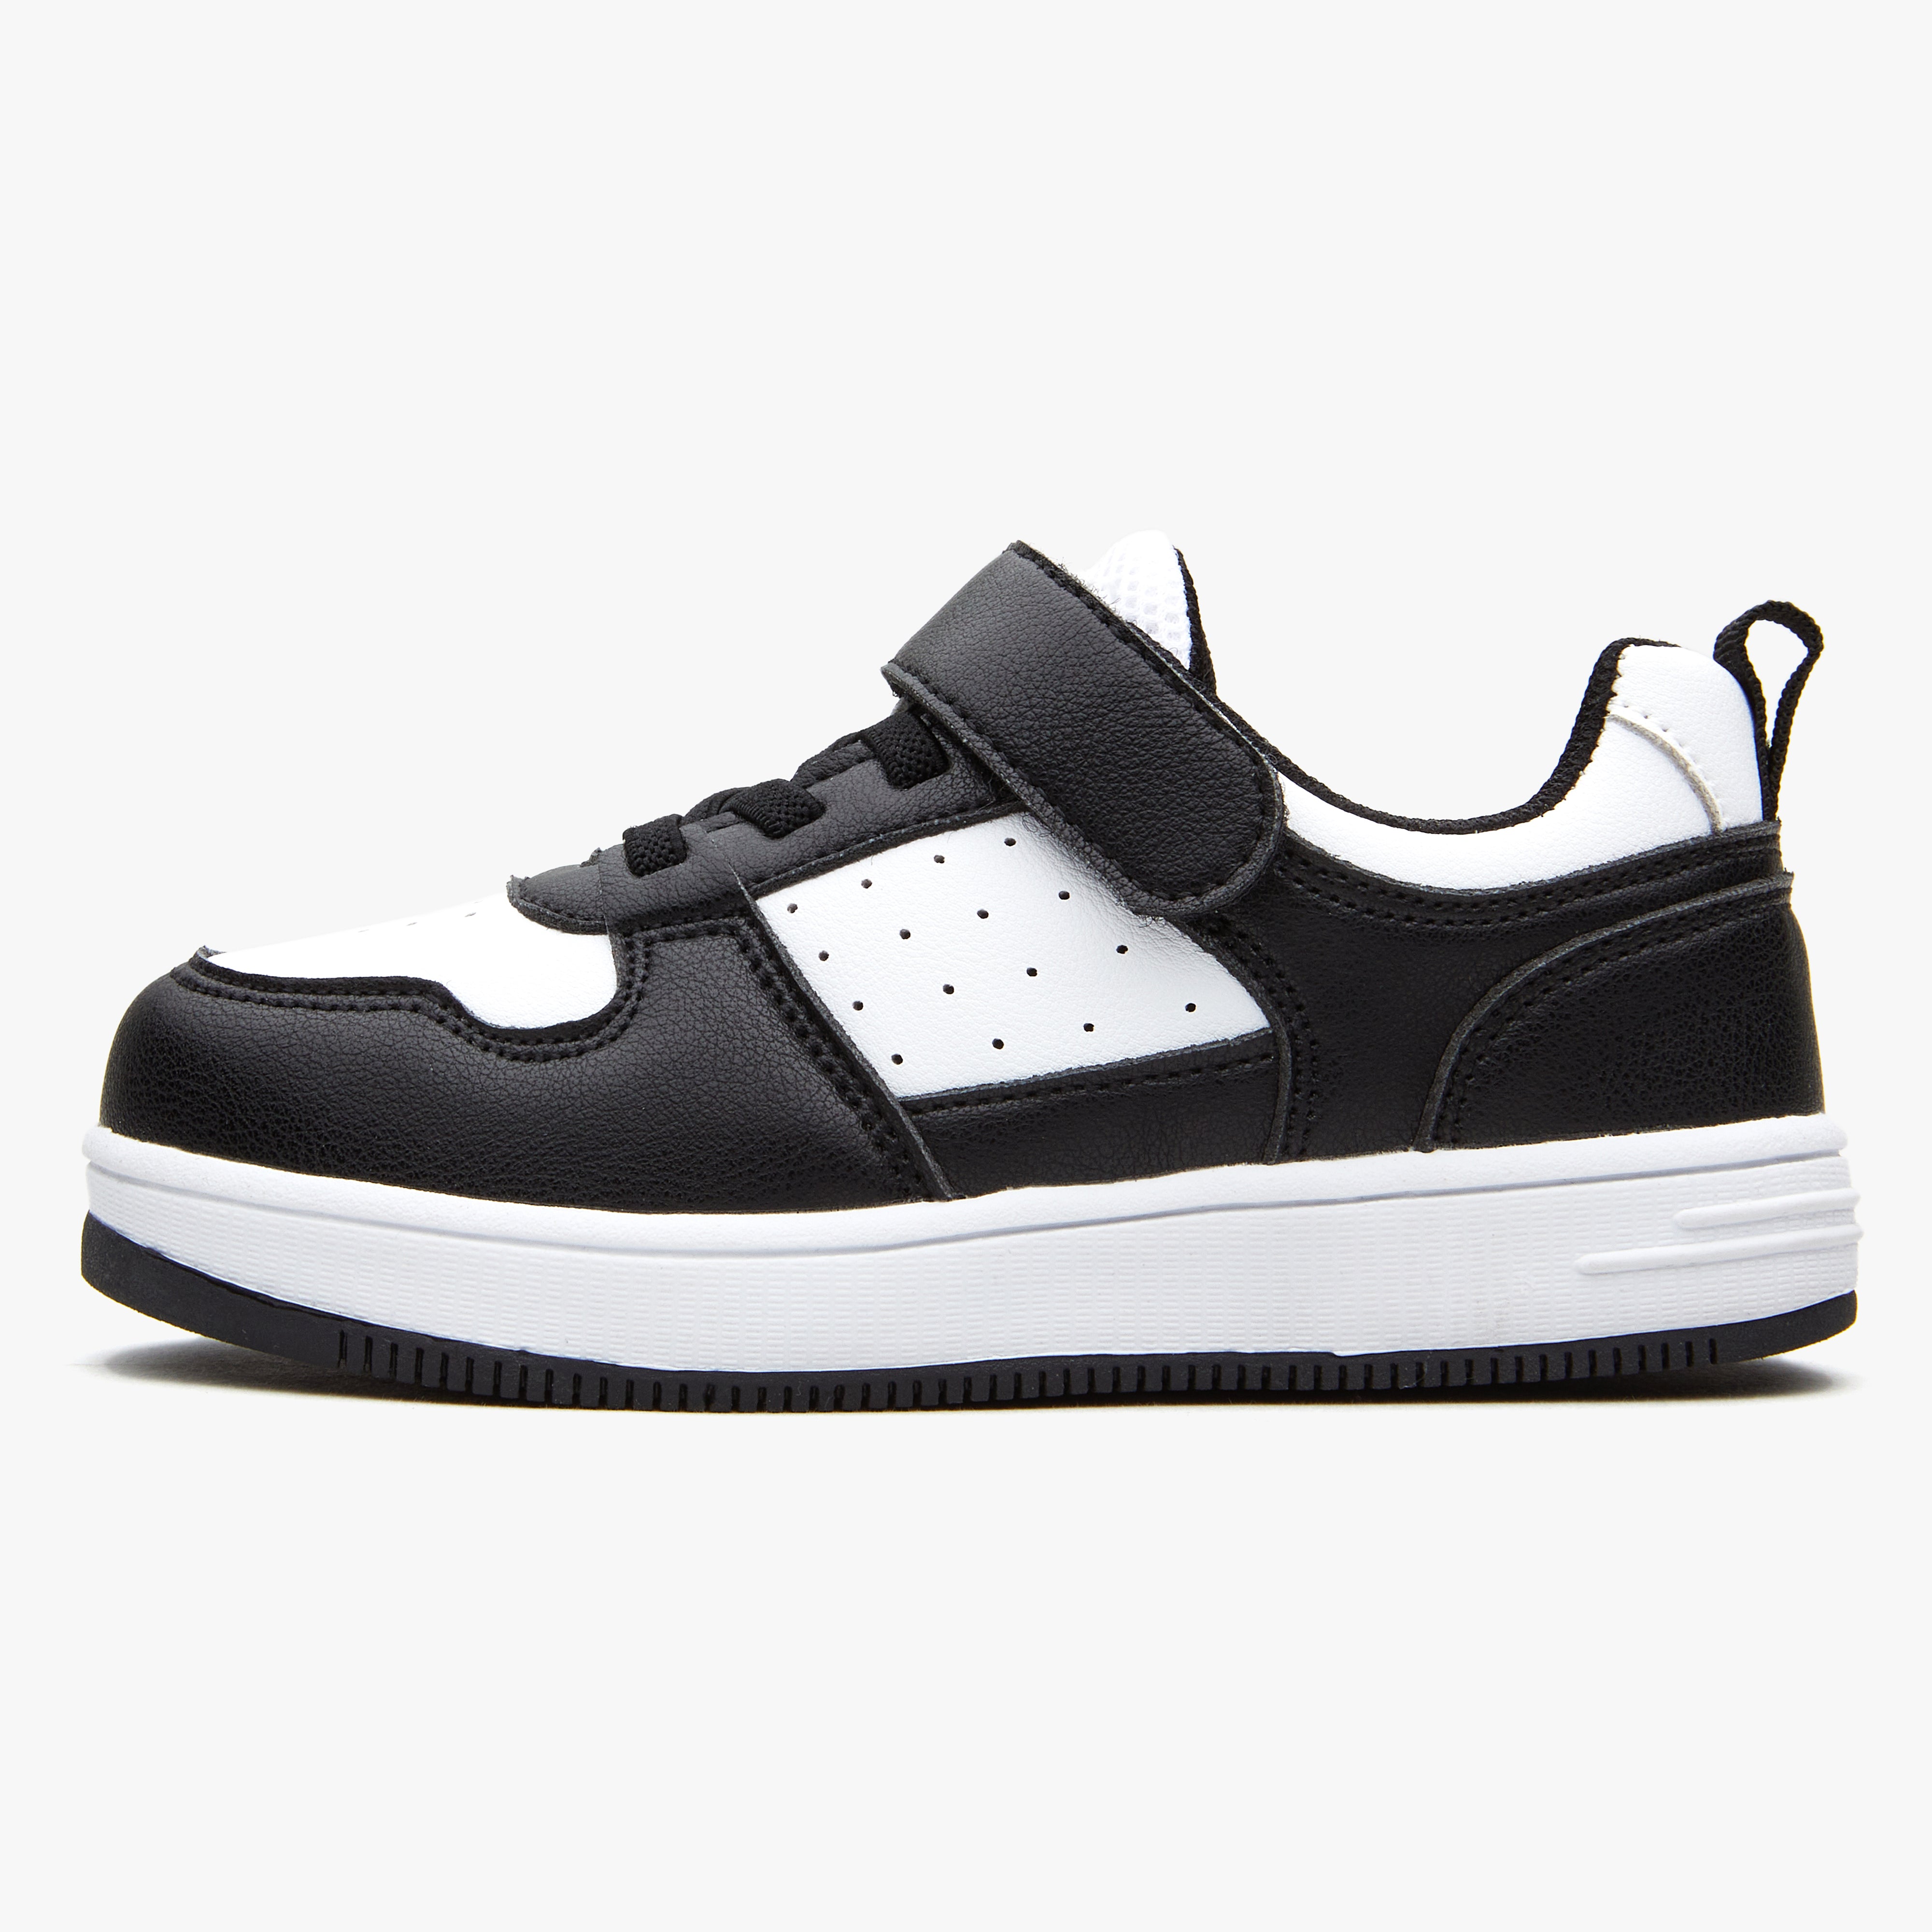 Toddler Little Kid Classic Low-Top Street Sneakers